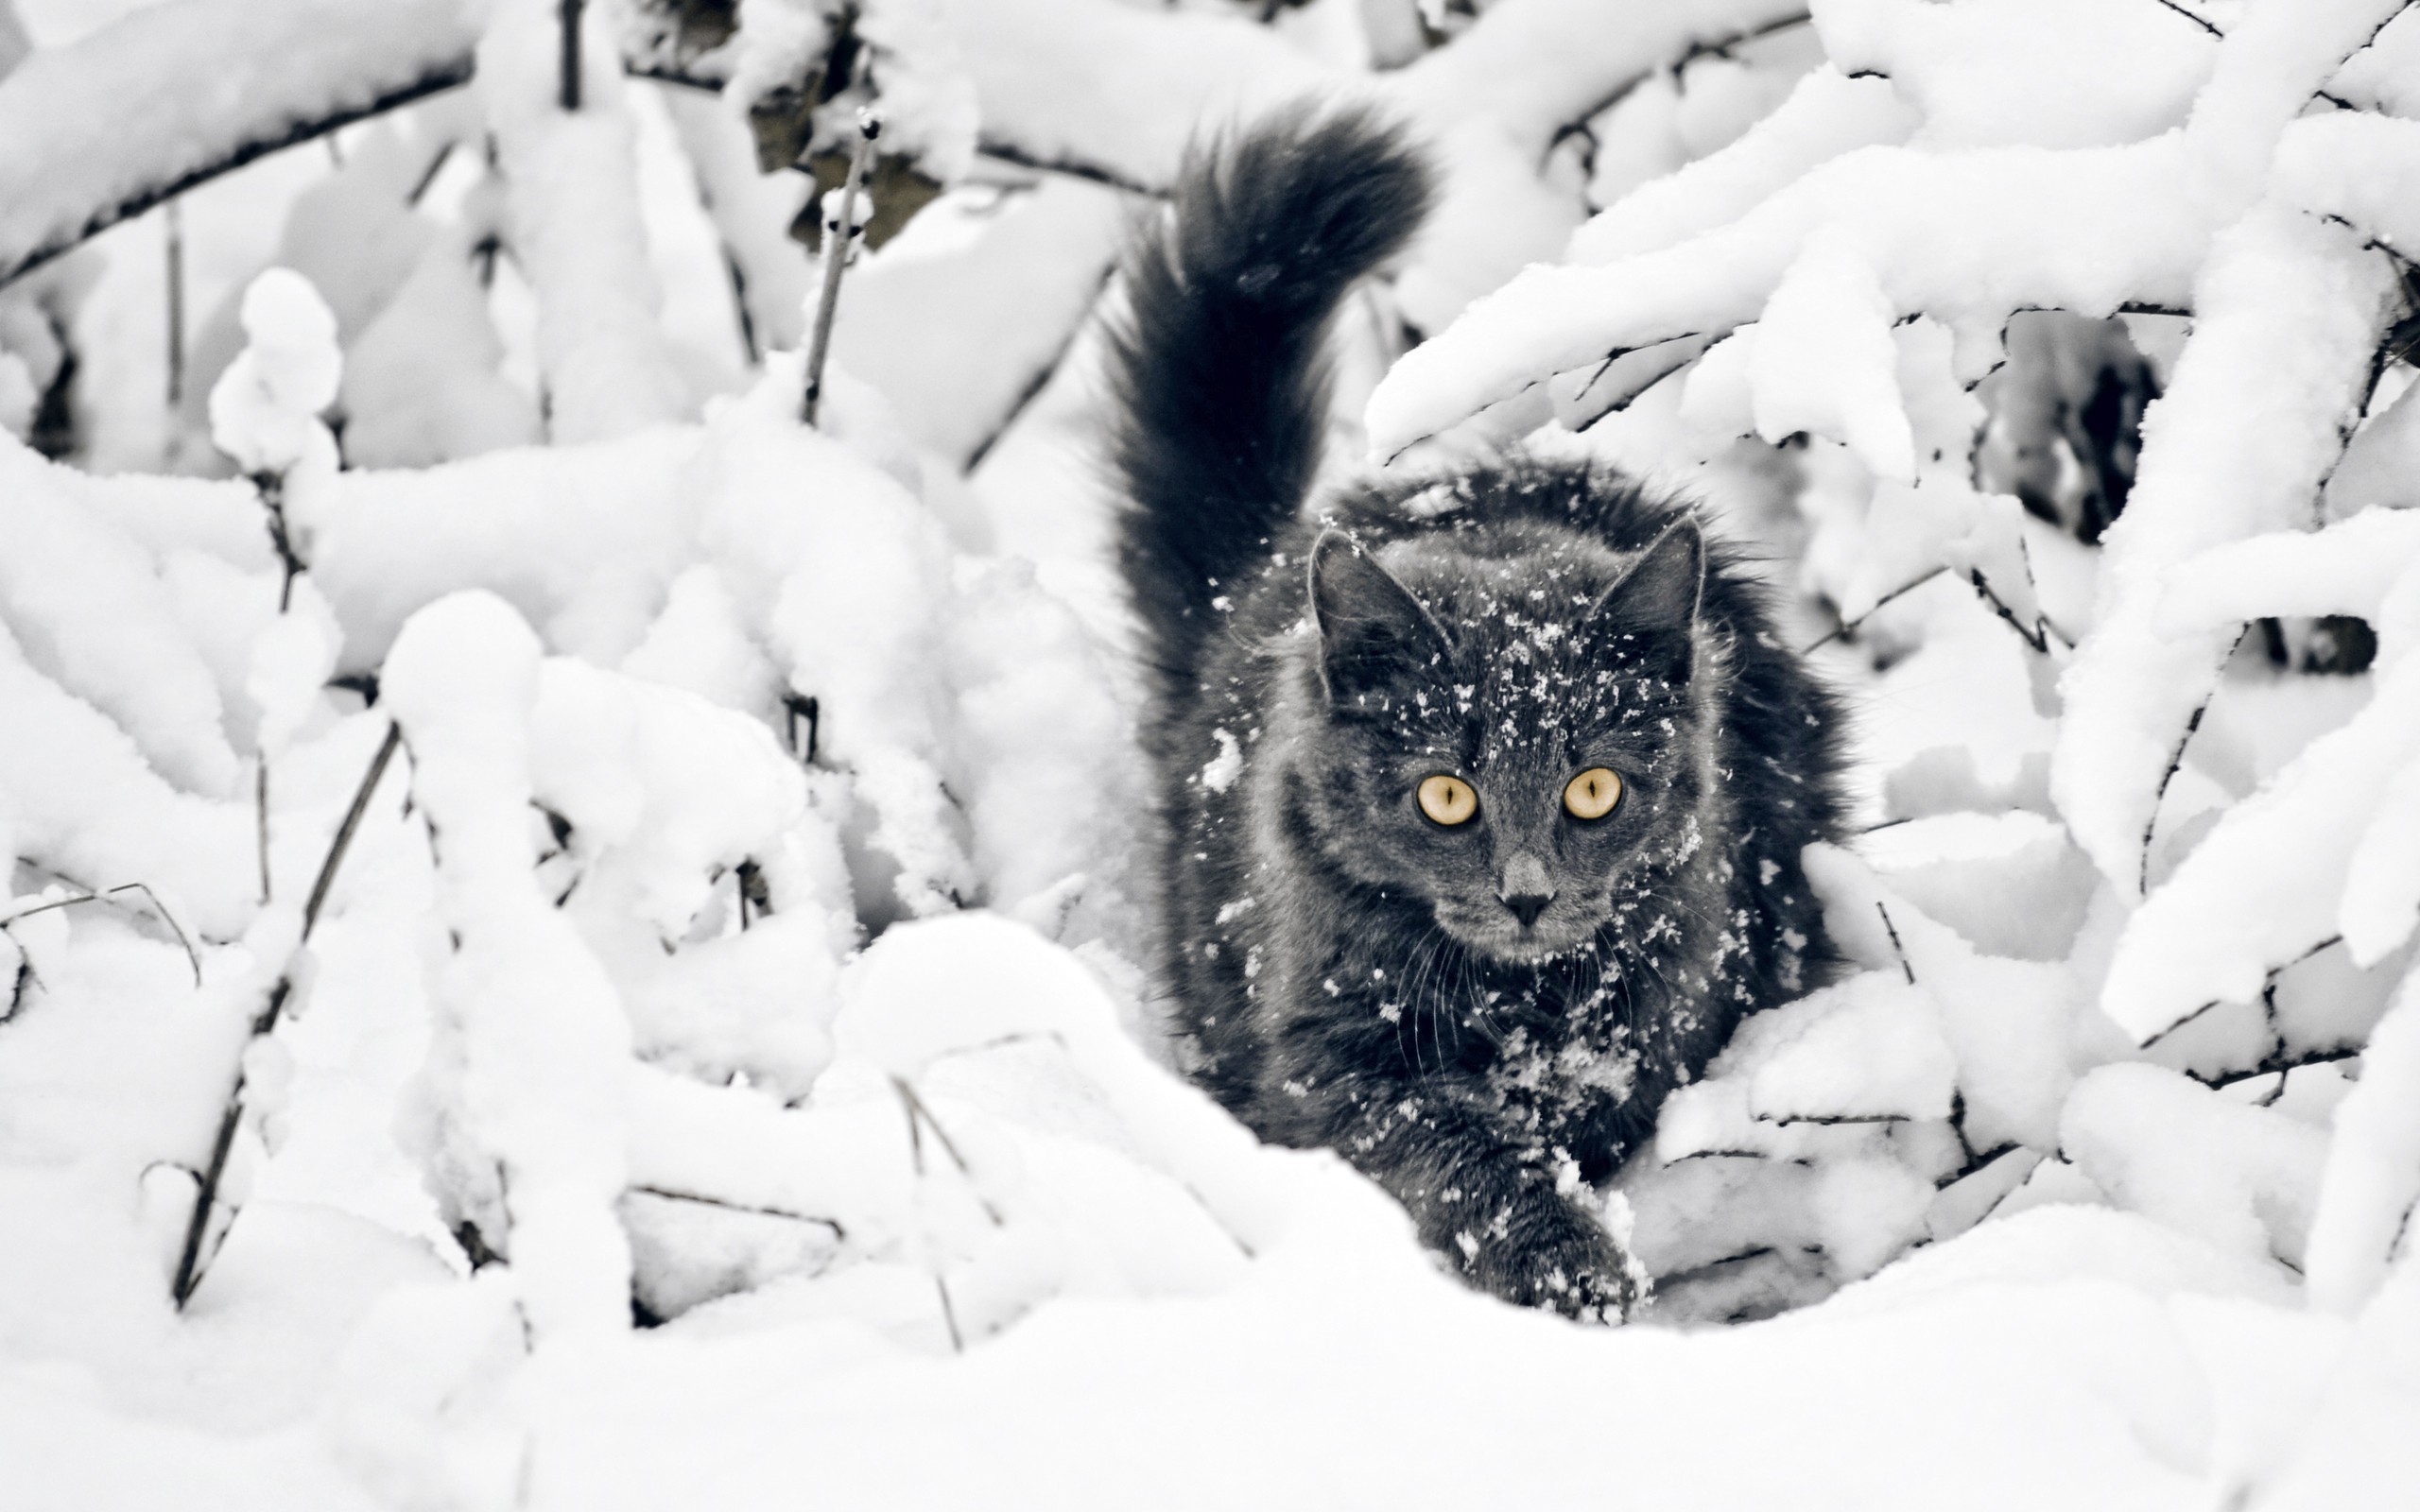 General 2560x1600 cats snow animals yellow eyes black cats mammals cold ice outdoors winter